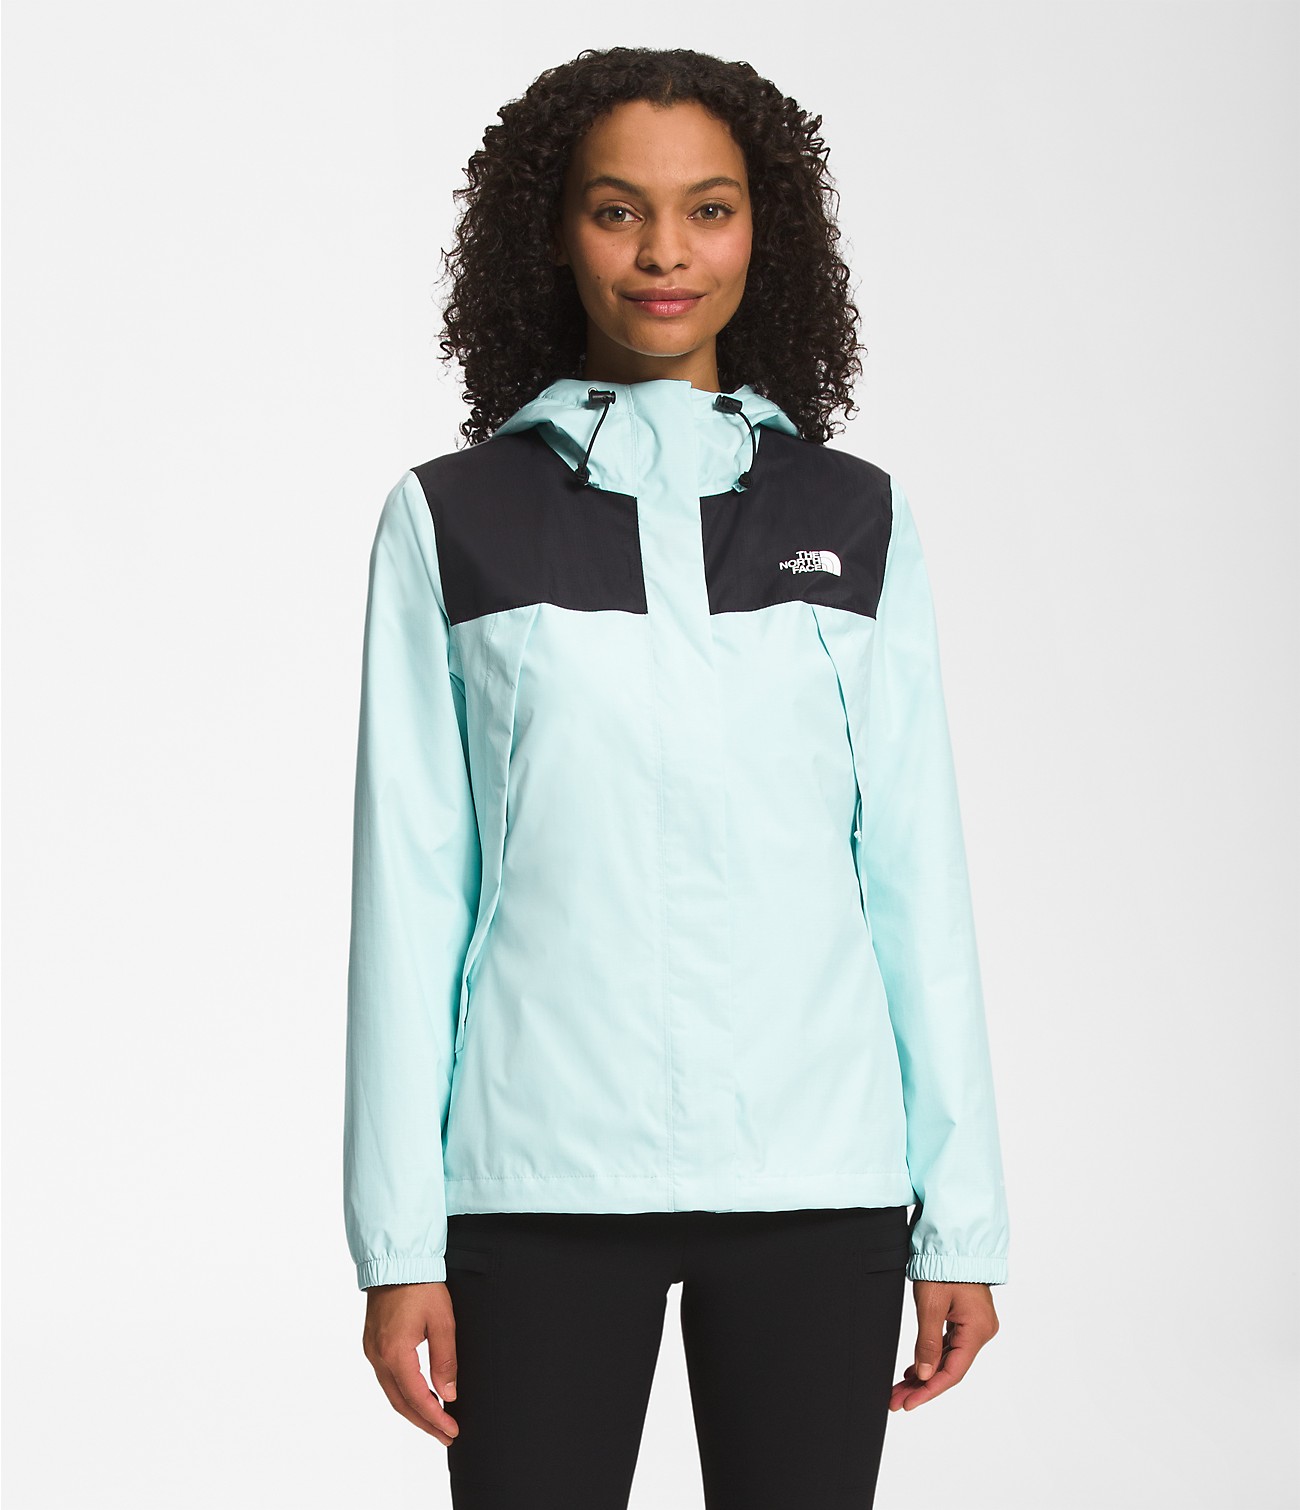 Unlock Wilderness' choice in the Mountain Hardwear Vs North Face comparison, the Antora Jacket by The North Face